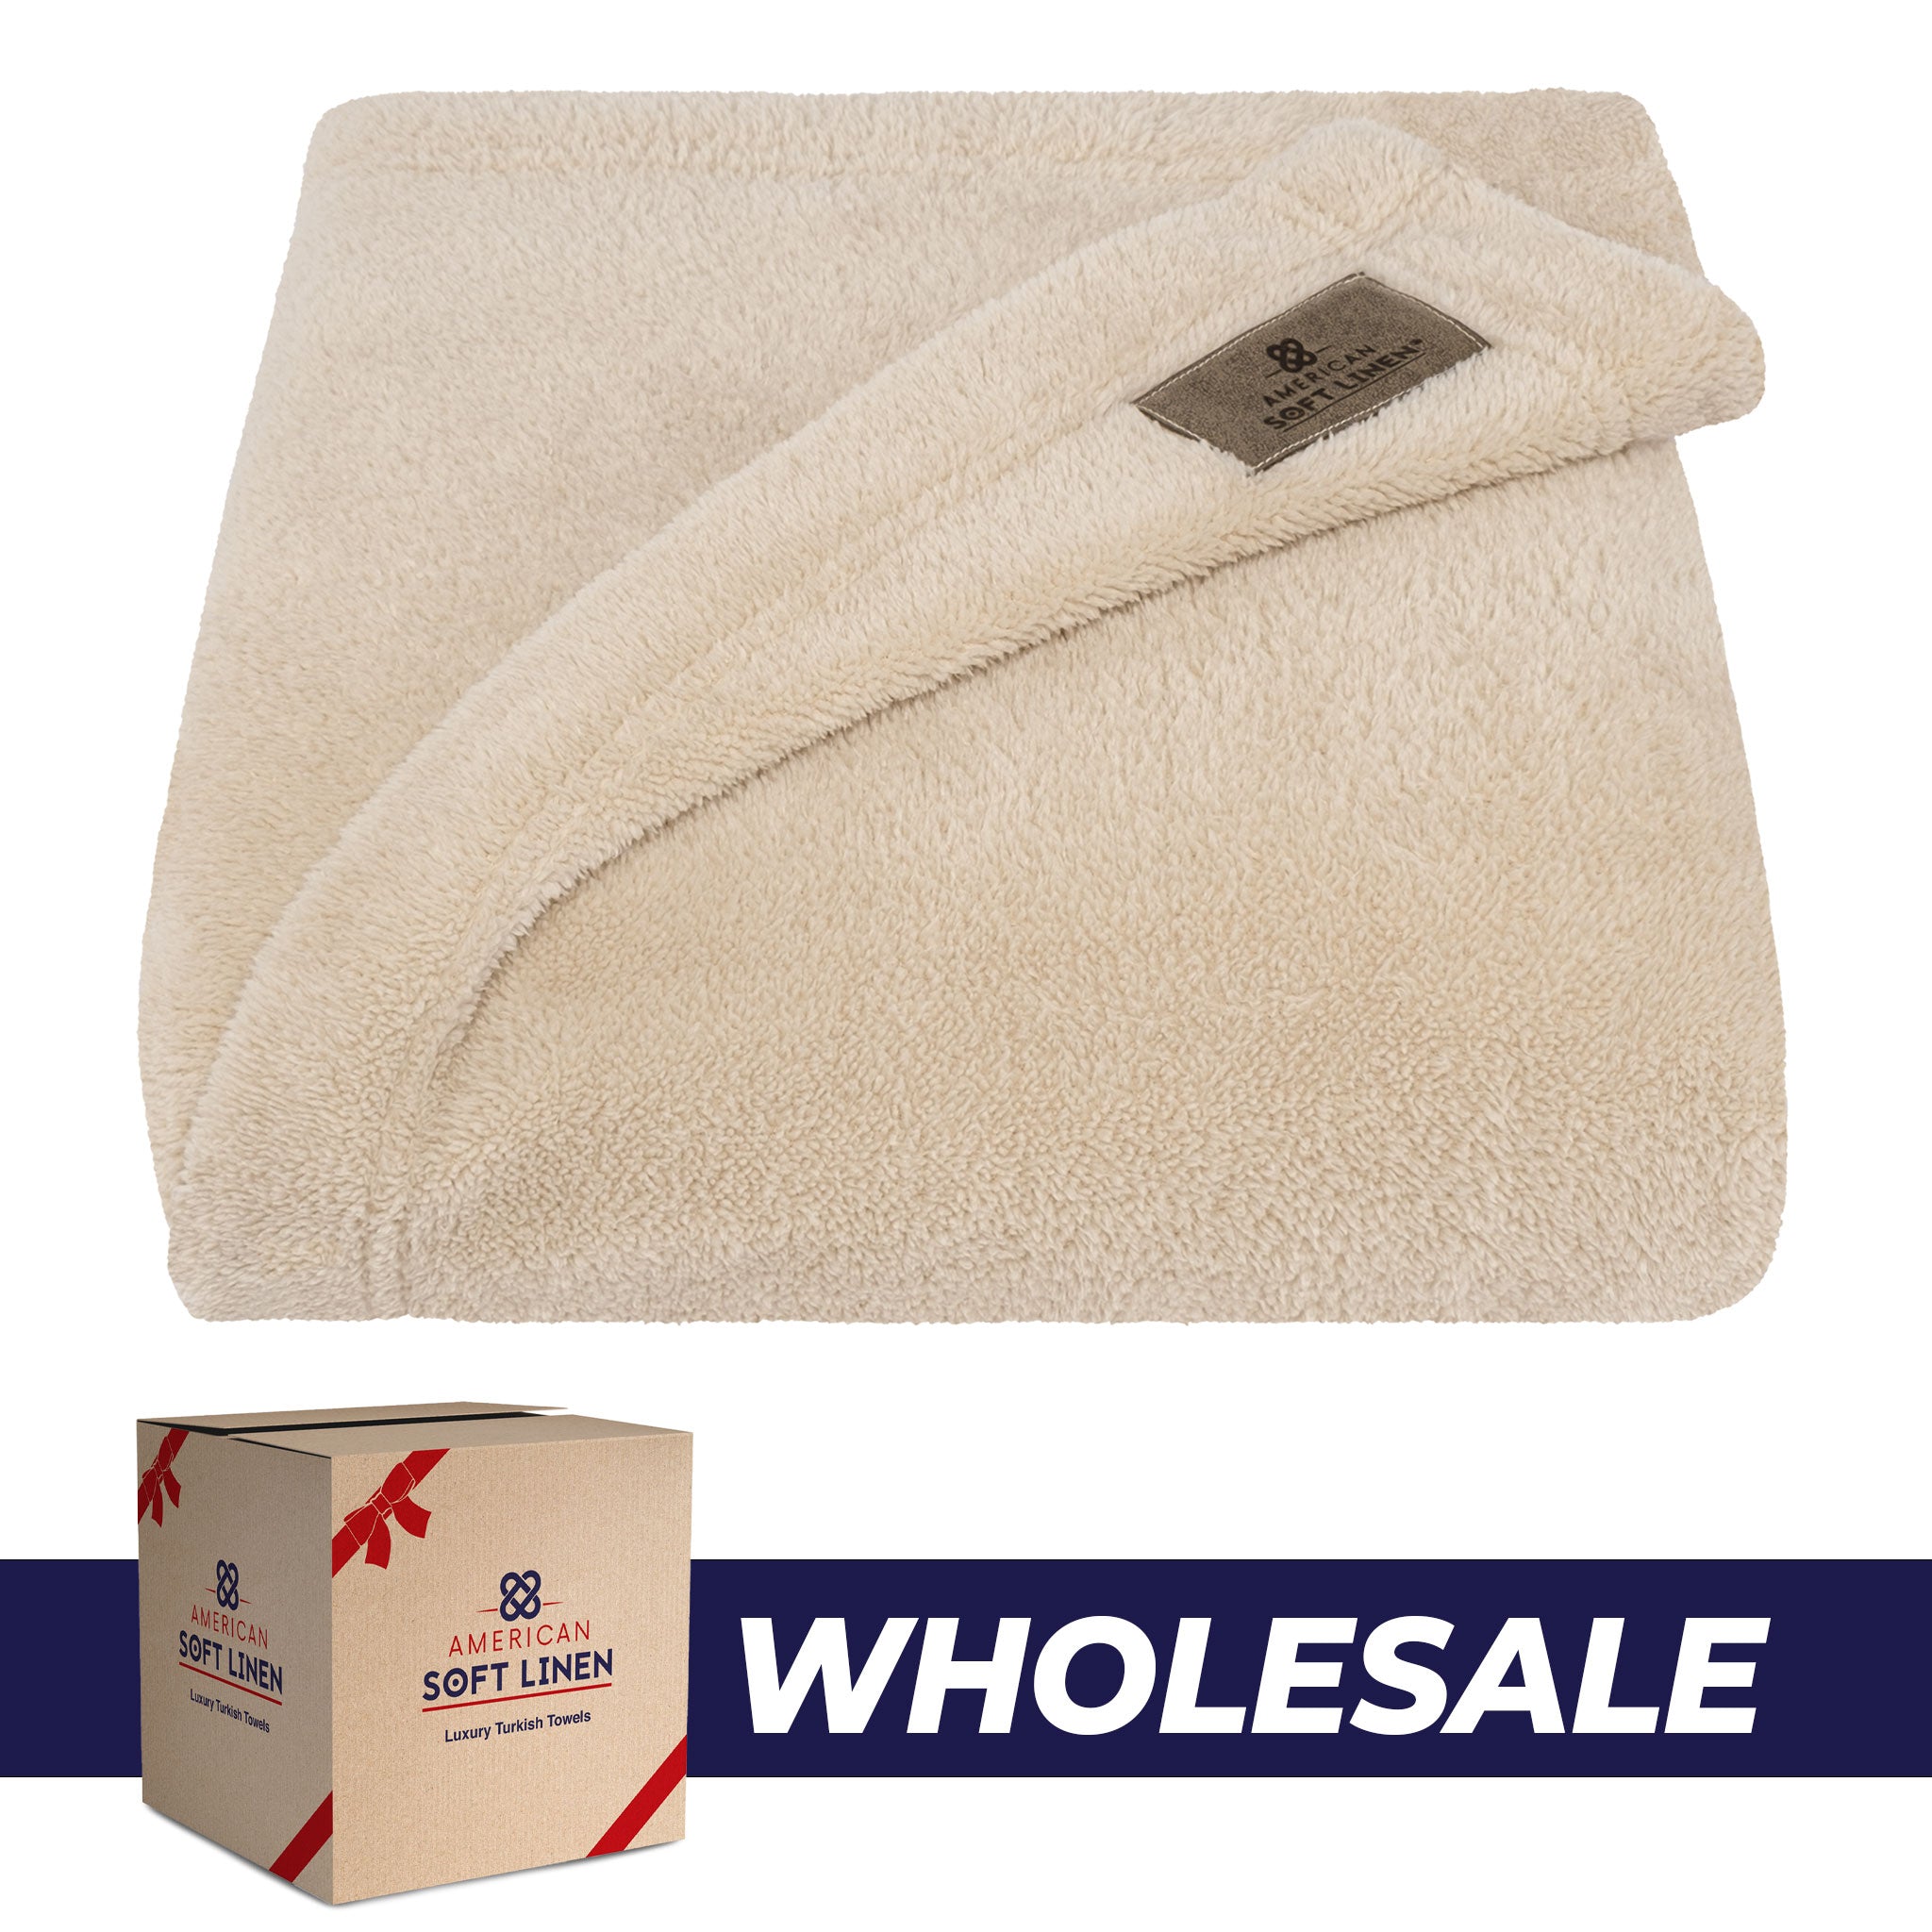 American Soft Linen - Bedding Fleece Blanket - Wholesale - 24 Set Case Pack - Throw Size 50x60 inches - Sand-Taupe - 0